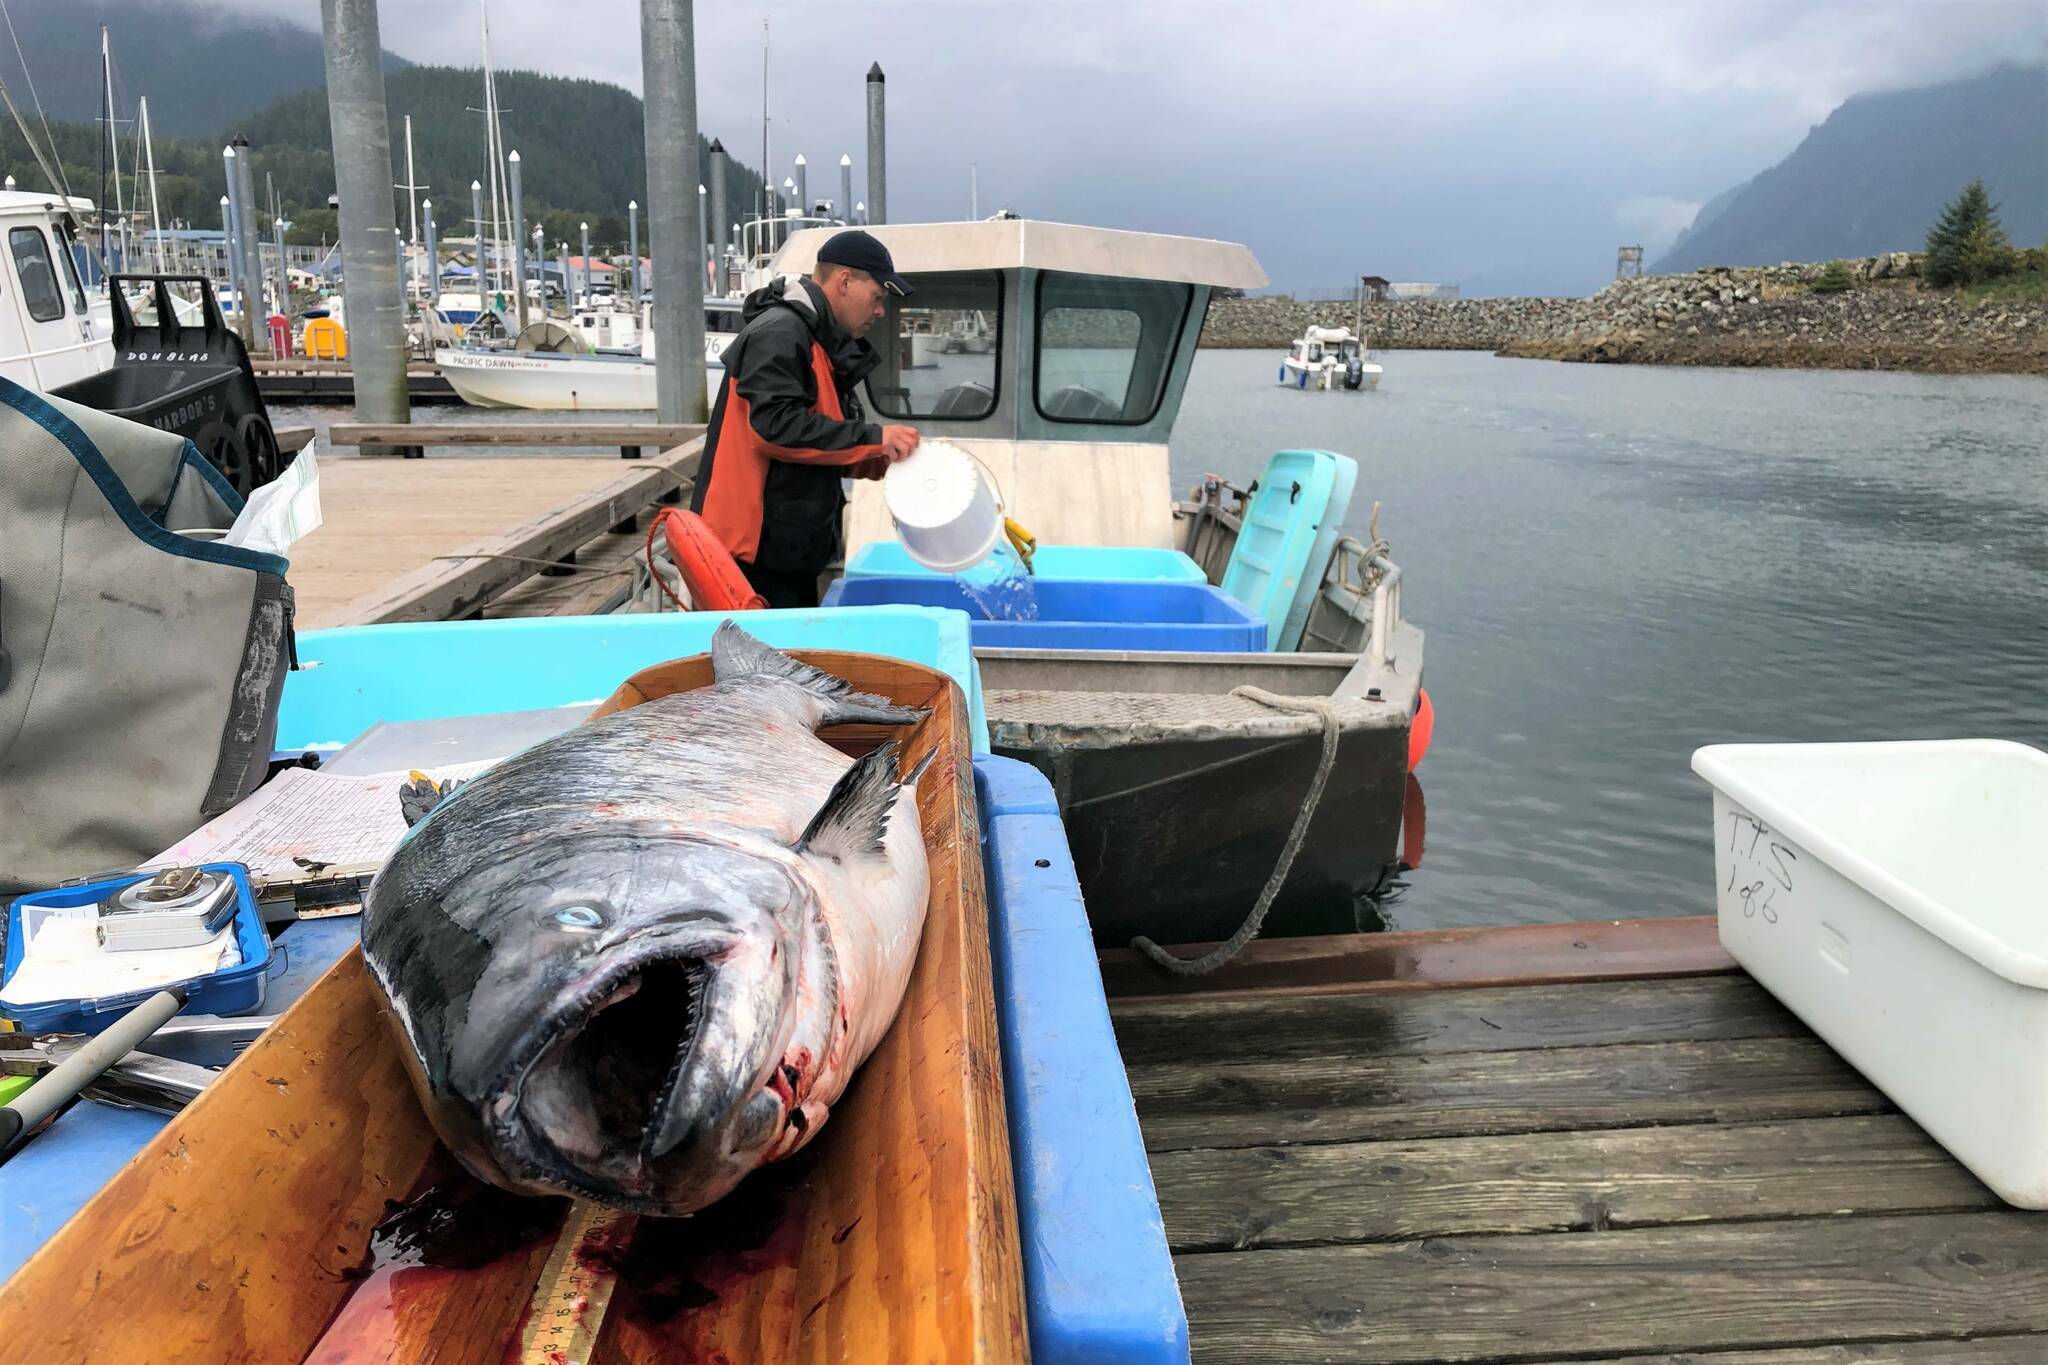 A king salmon is laid out for inspection by Alaska Department of Fish and Game at the Mike Pusich Douglas Harbor during the Golden North Salmon Derby on Aug. 25, 2019. (Peter Segall / Juneau Empire File)